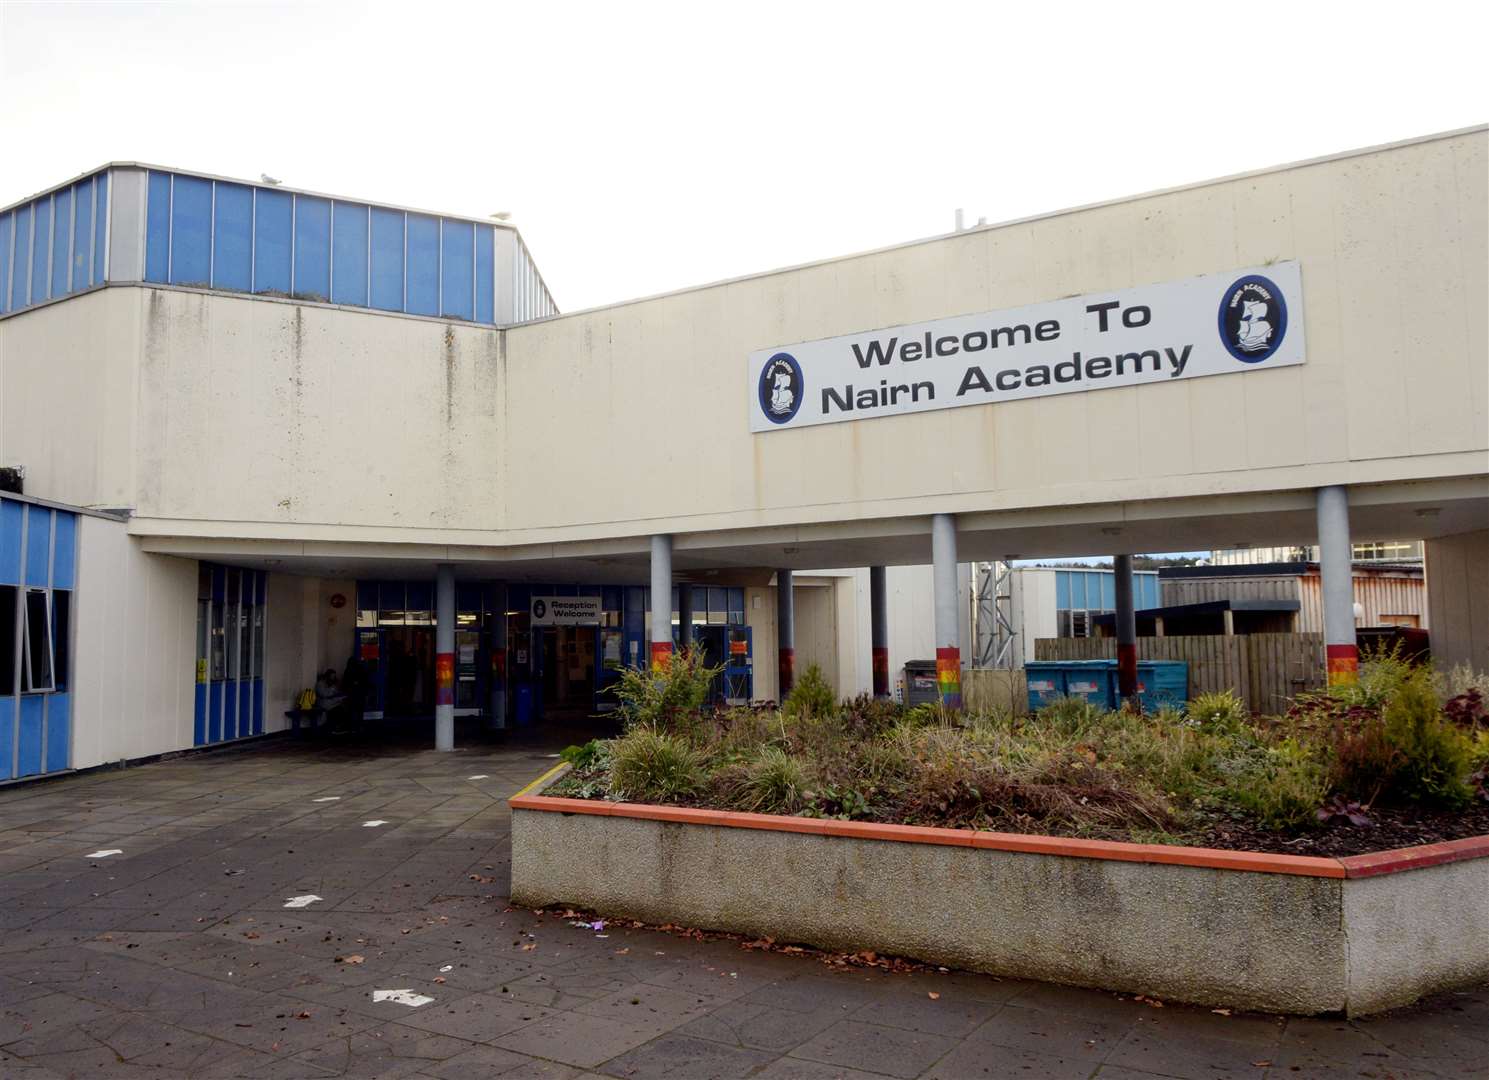 There is a long-term vision to replace the current Nairn Academy building. Picture: James Mackenzie